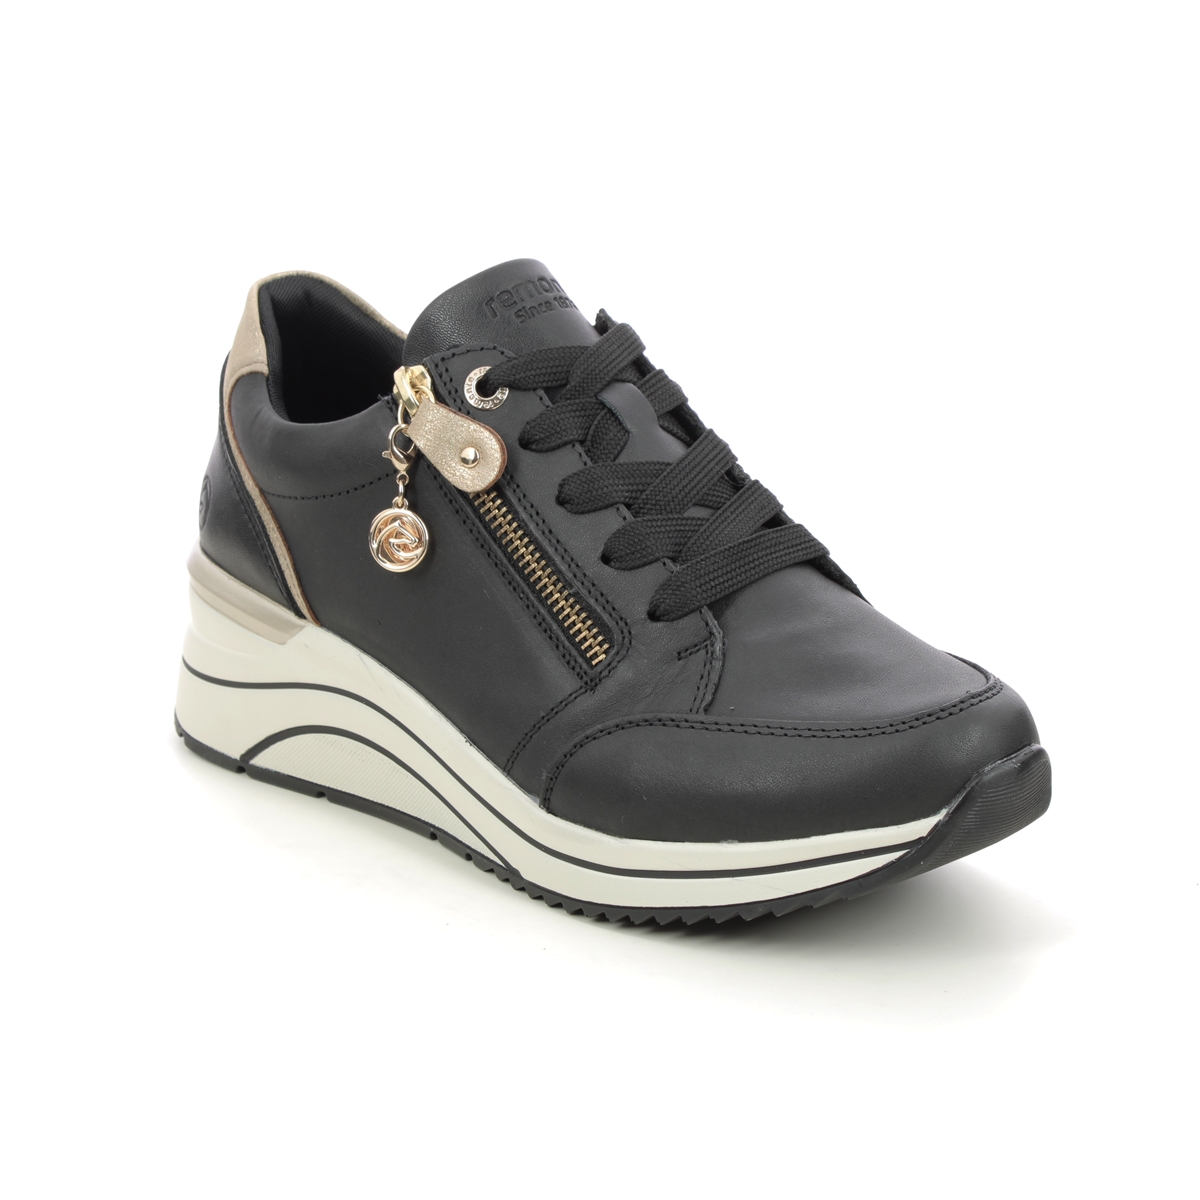 Remonte D0T03-01 Ranzip Wedge Black leather Womens trainers in a Plain Leather in Size 41